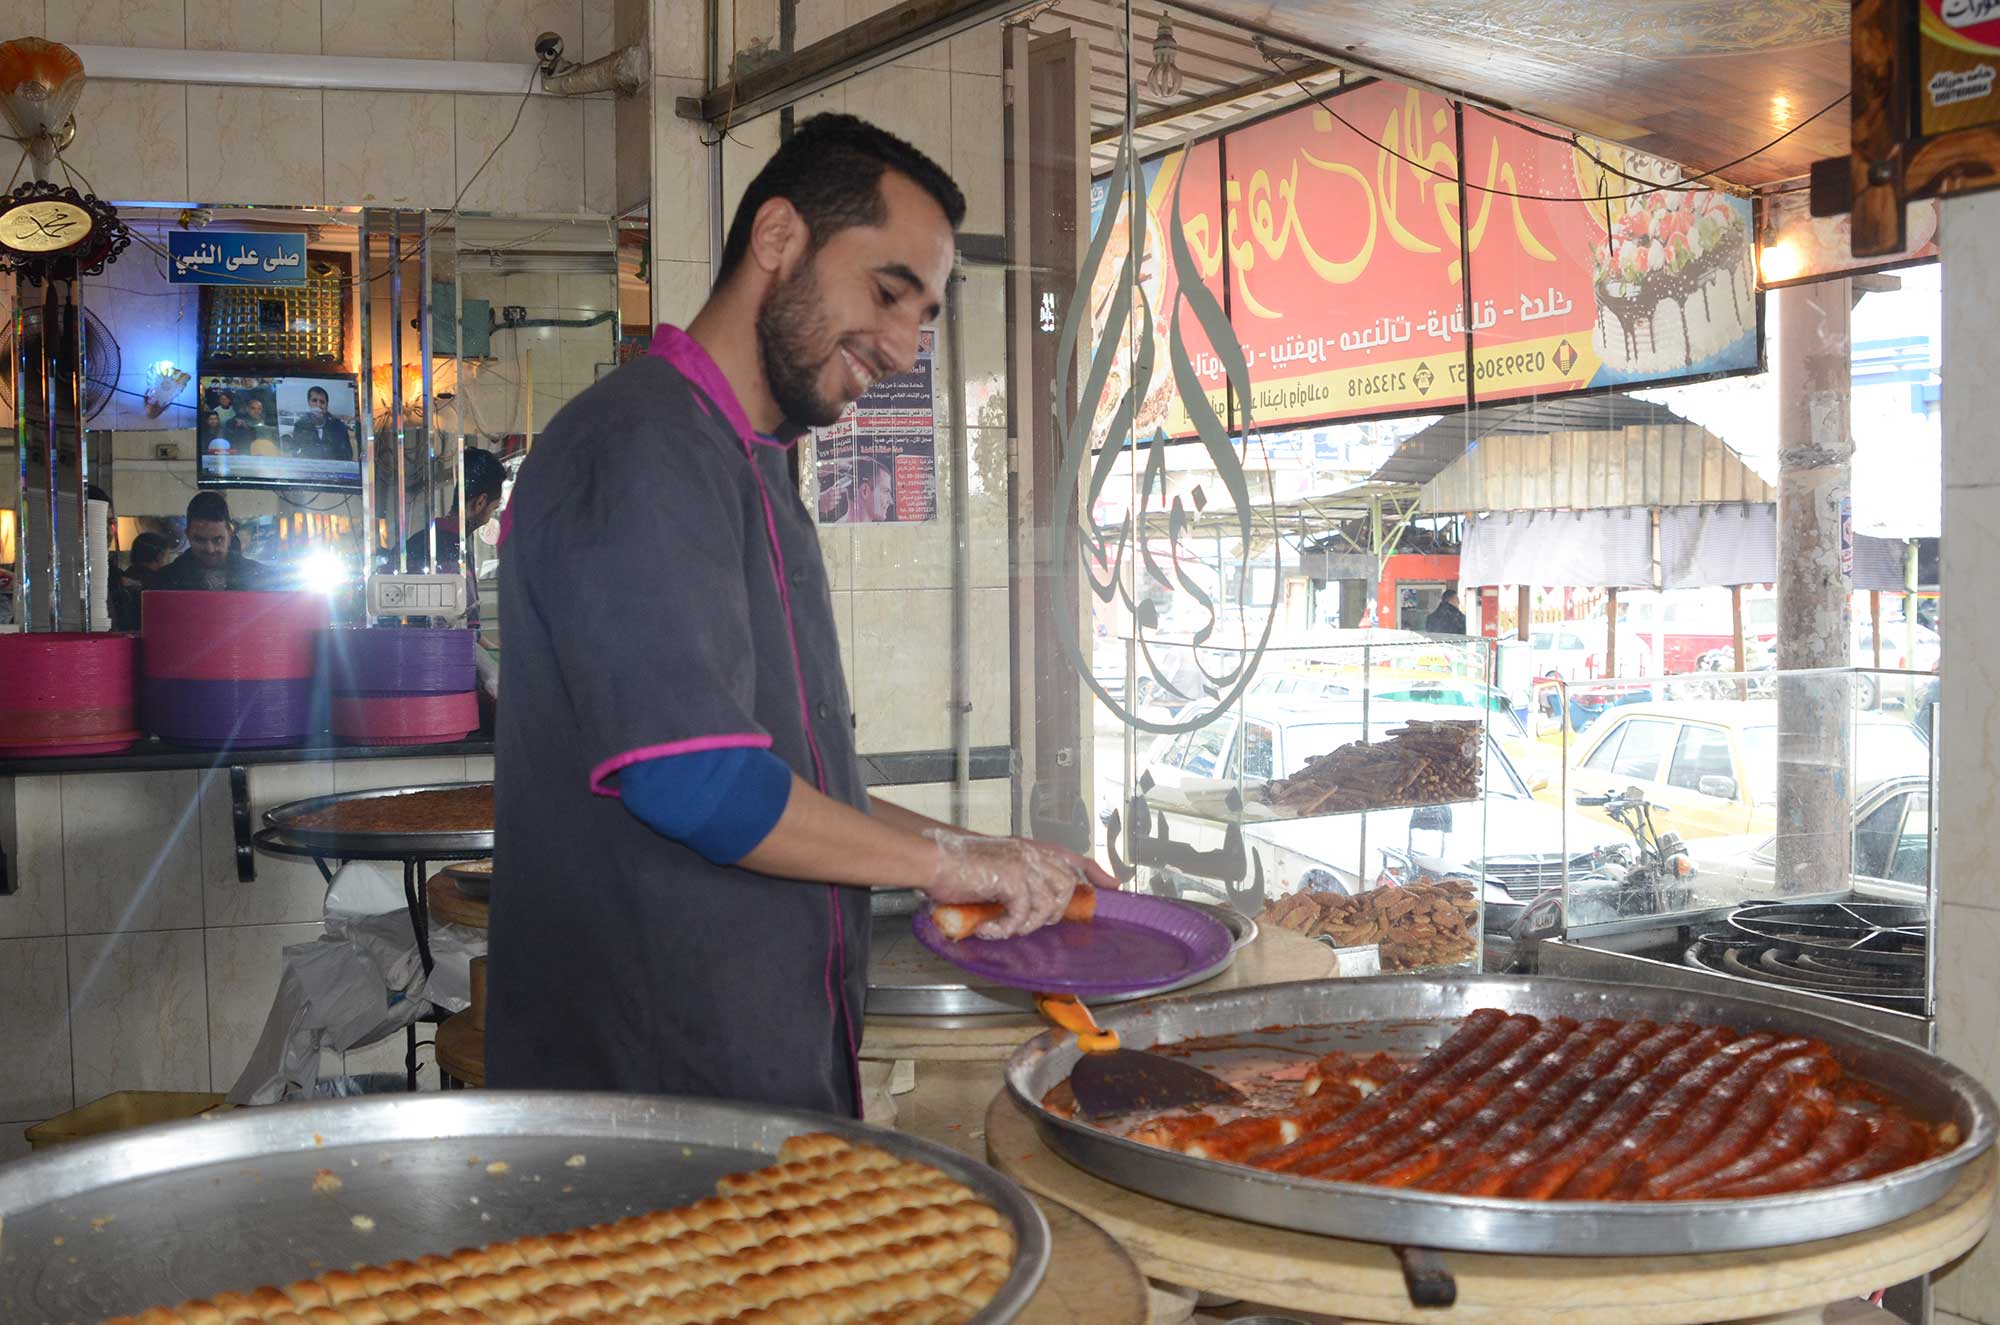 Because of the Gaza water crisis, it's hard for Mohammed to maintain good hygiene in his bakery.